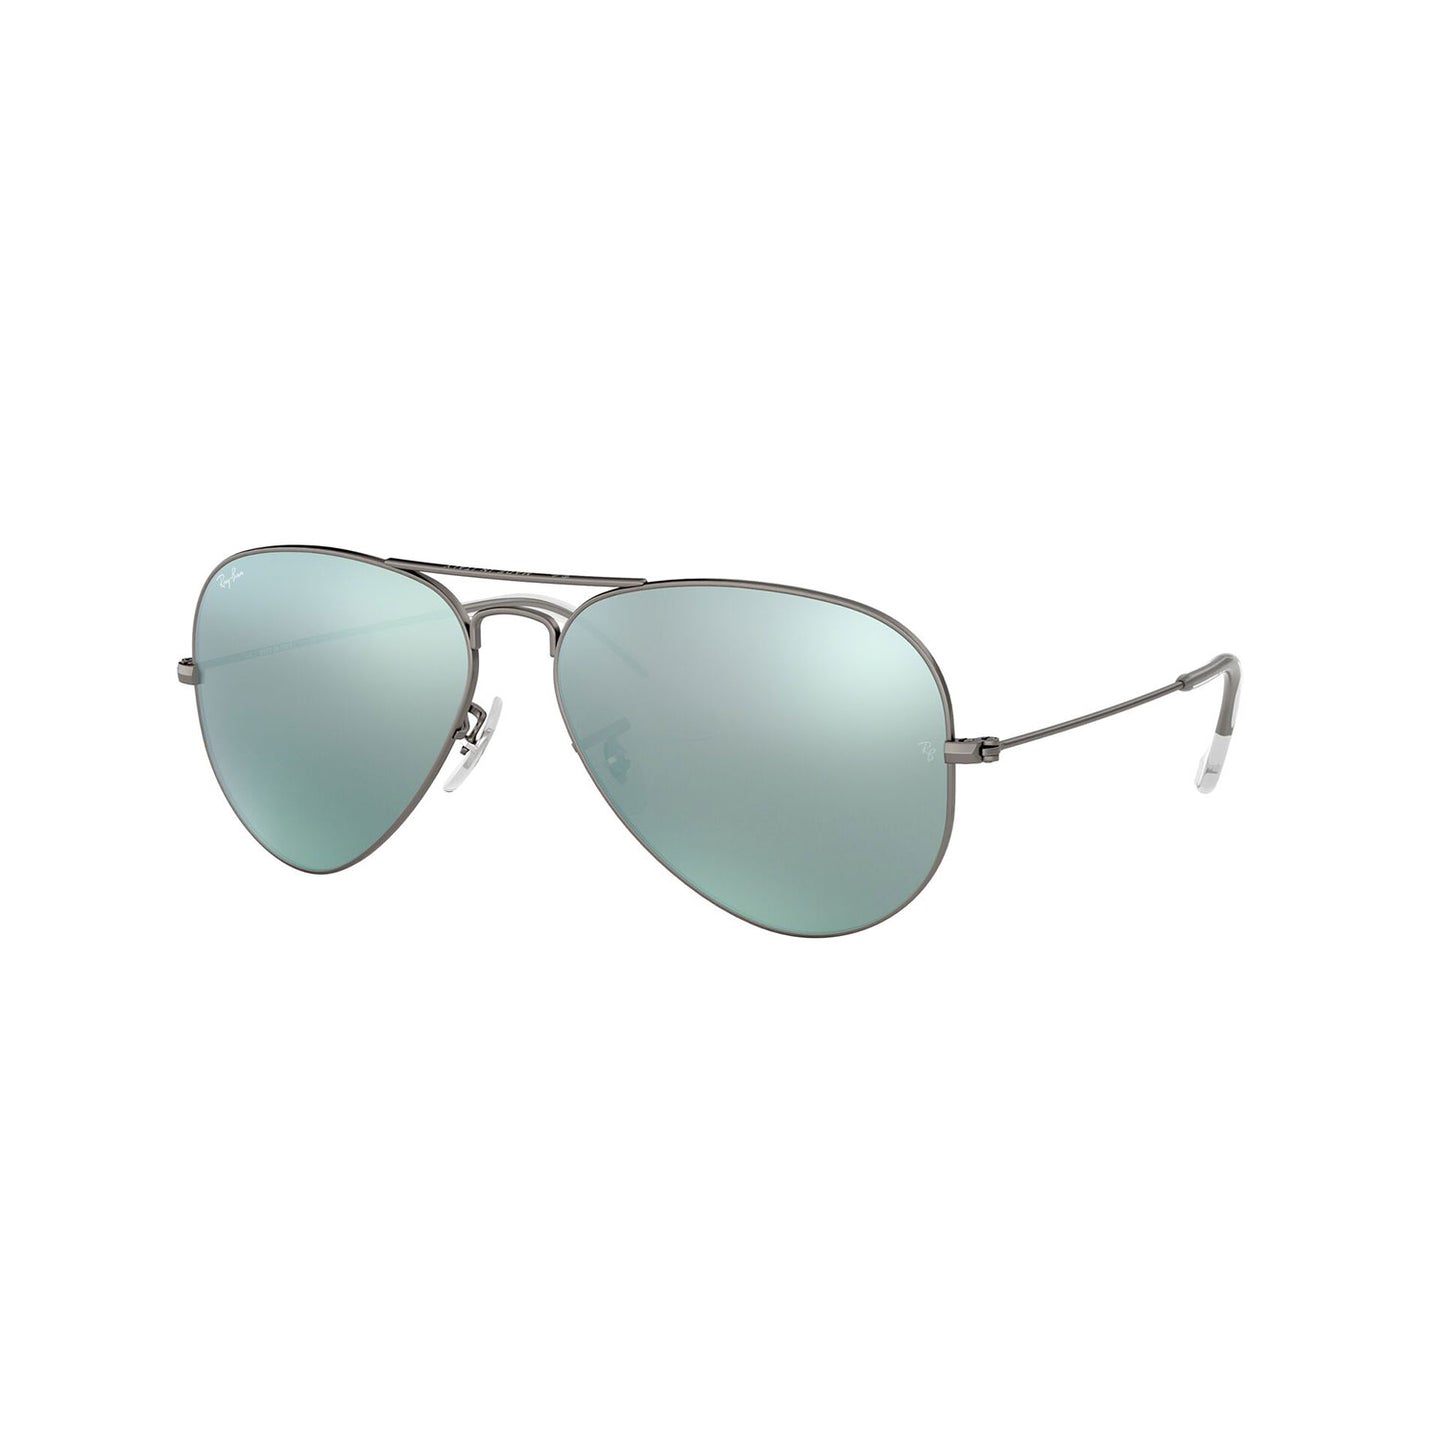 sunglasses ray ban model rb 3025 color 029/30